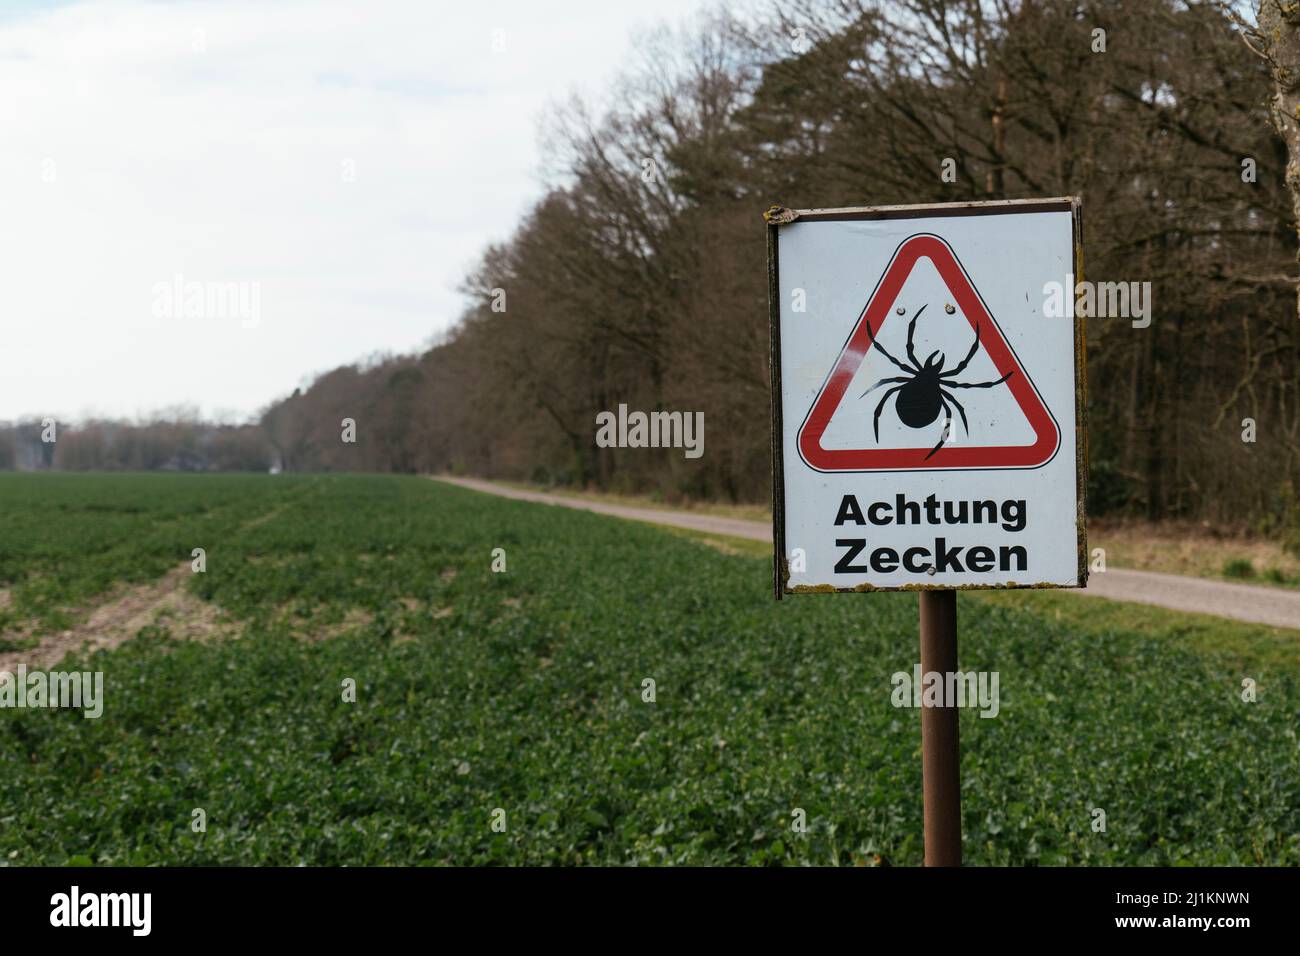 Warning sign against ticks in a forest area in Germany near Petershagen. Stock Photo